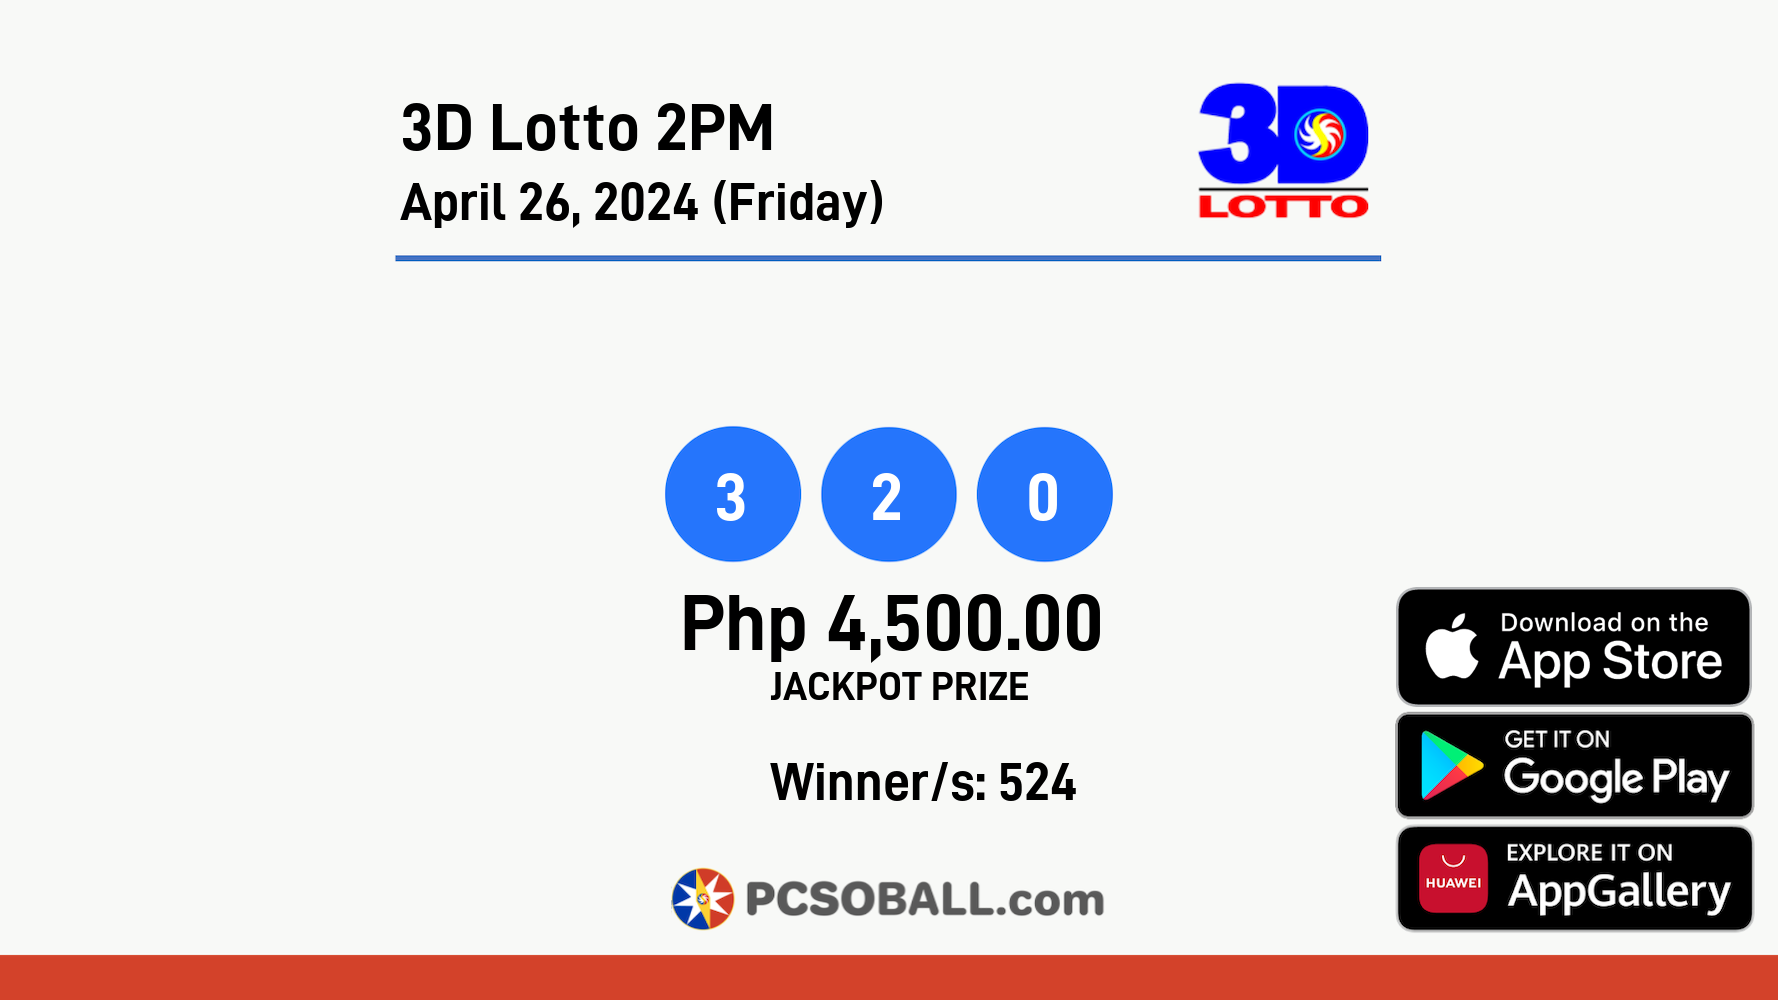 3D Lotto 2PM April 26, 2024 (Friday) Result